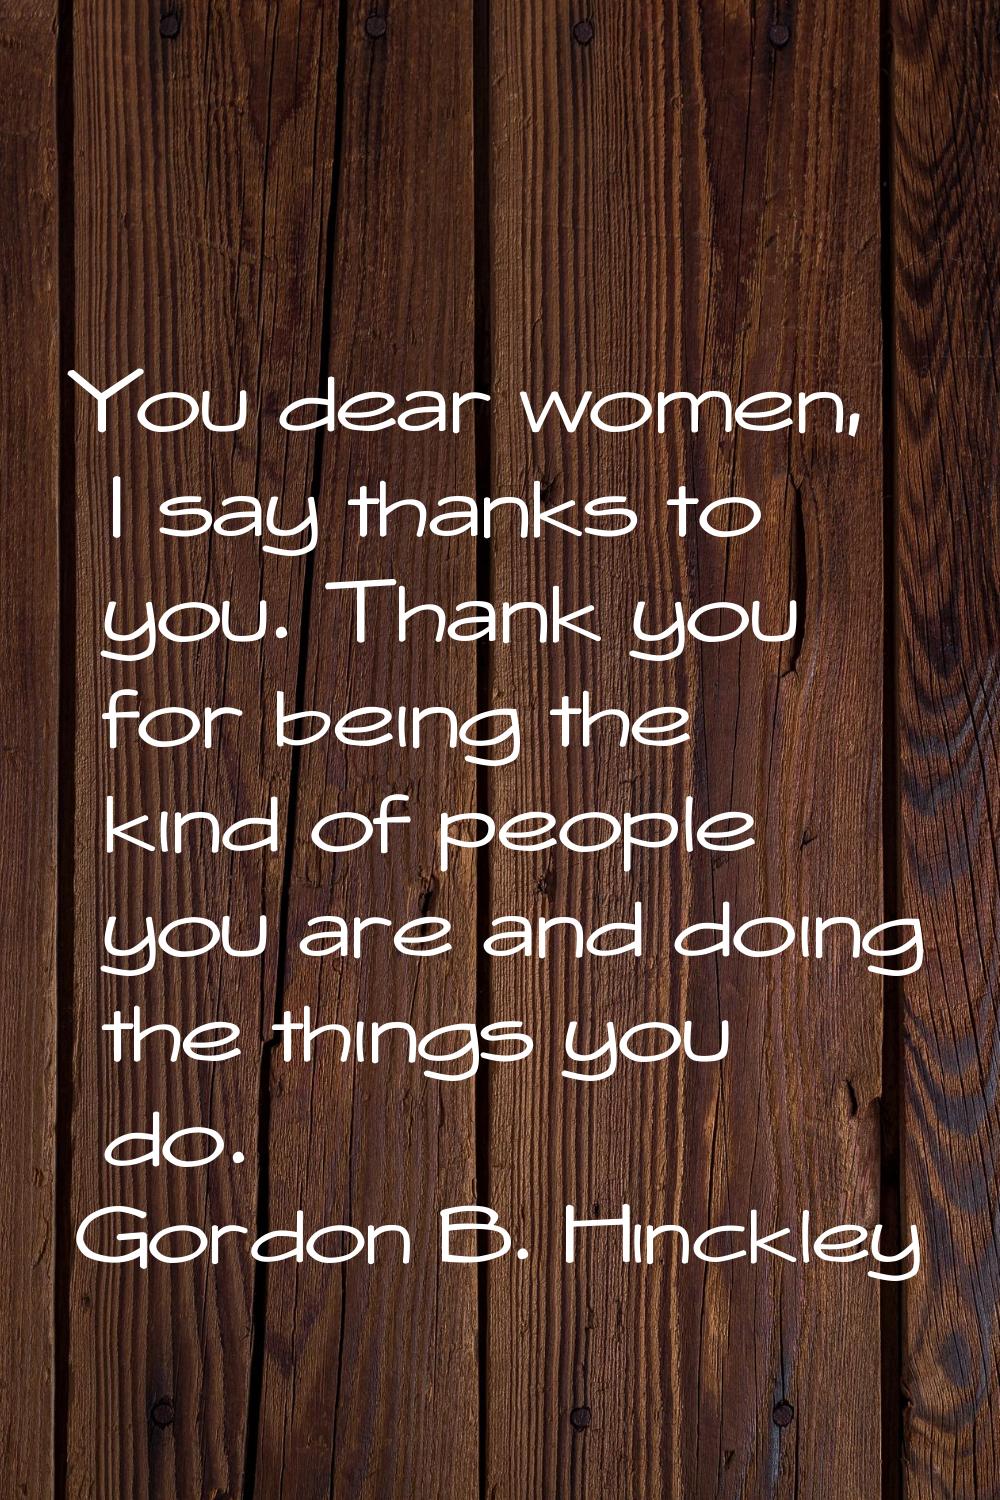 You dear women, I say thanks to you. Thank you for being the kind of people you are and doing the t